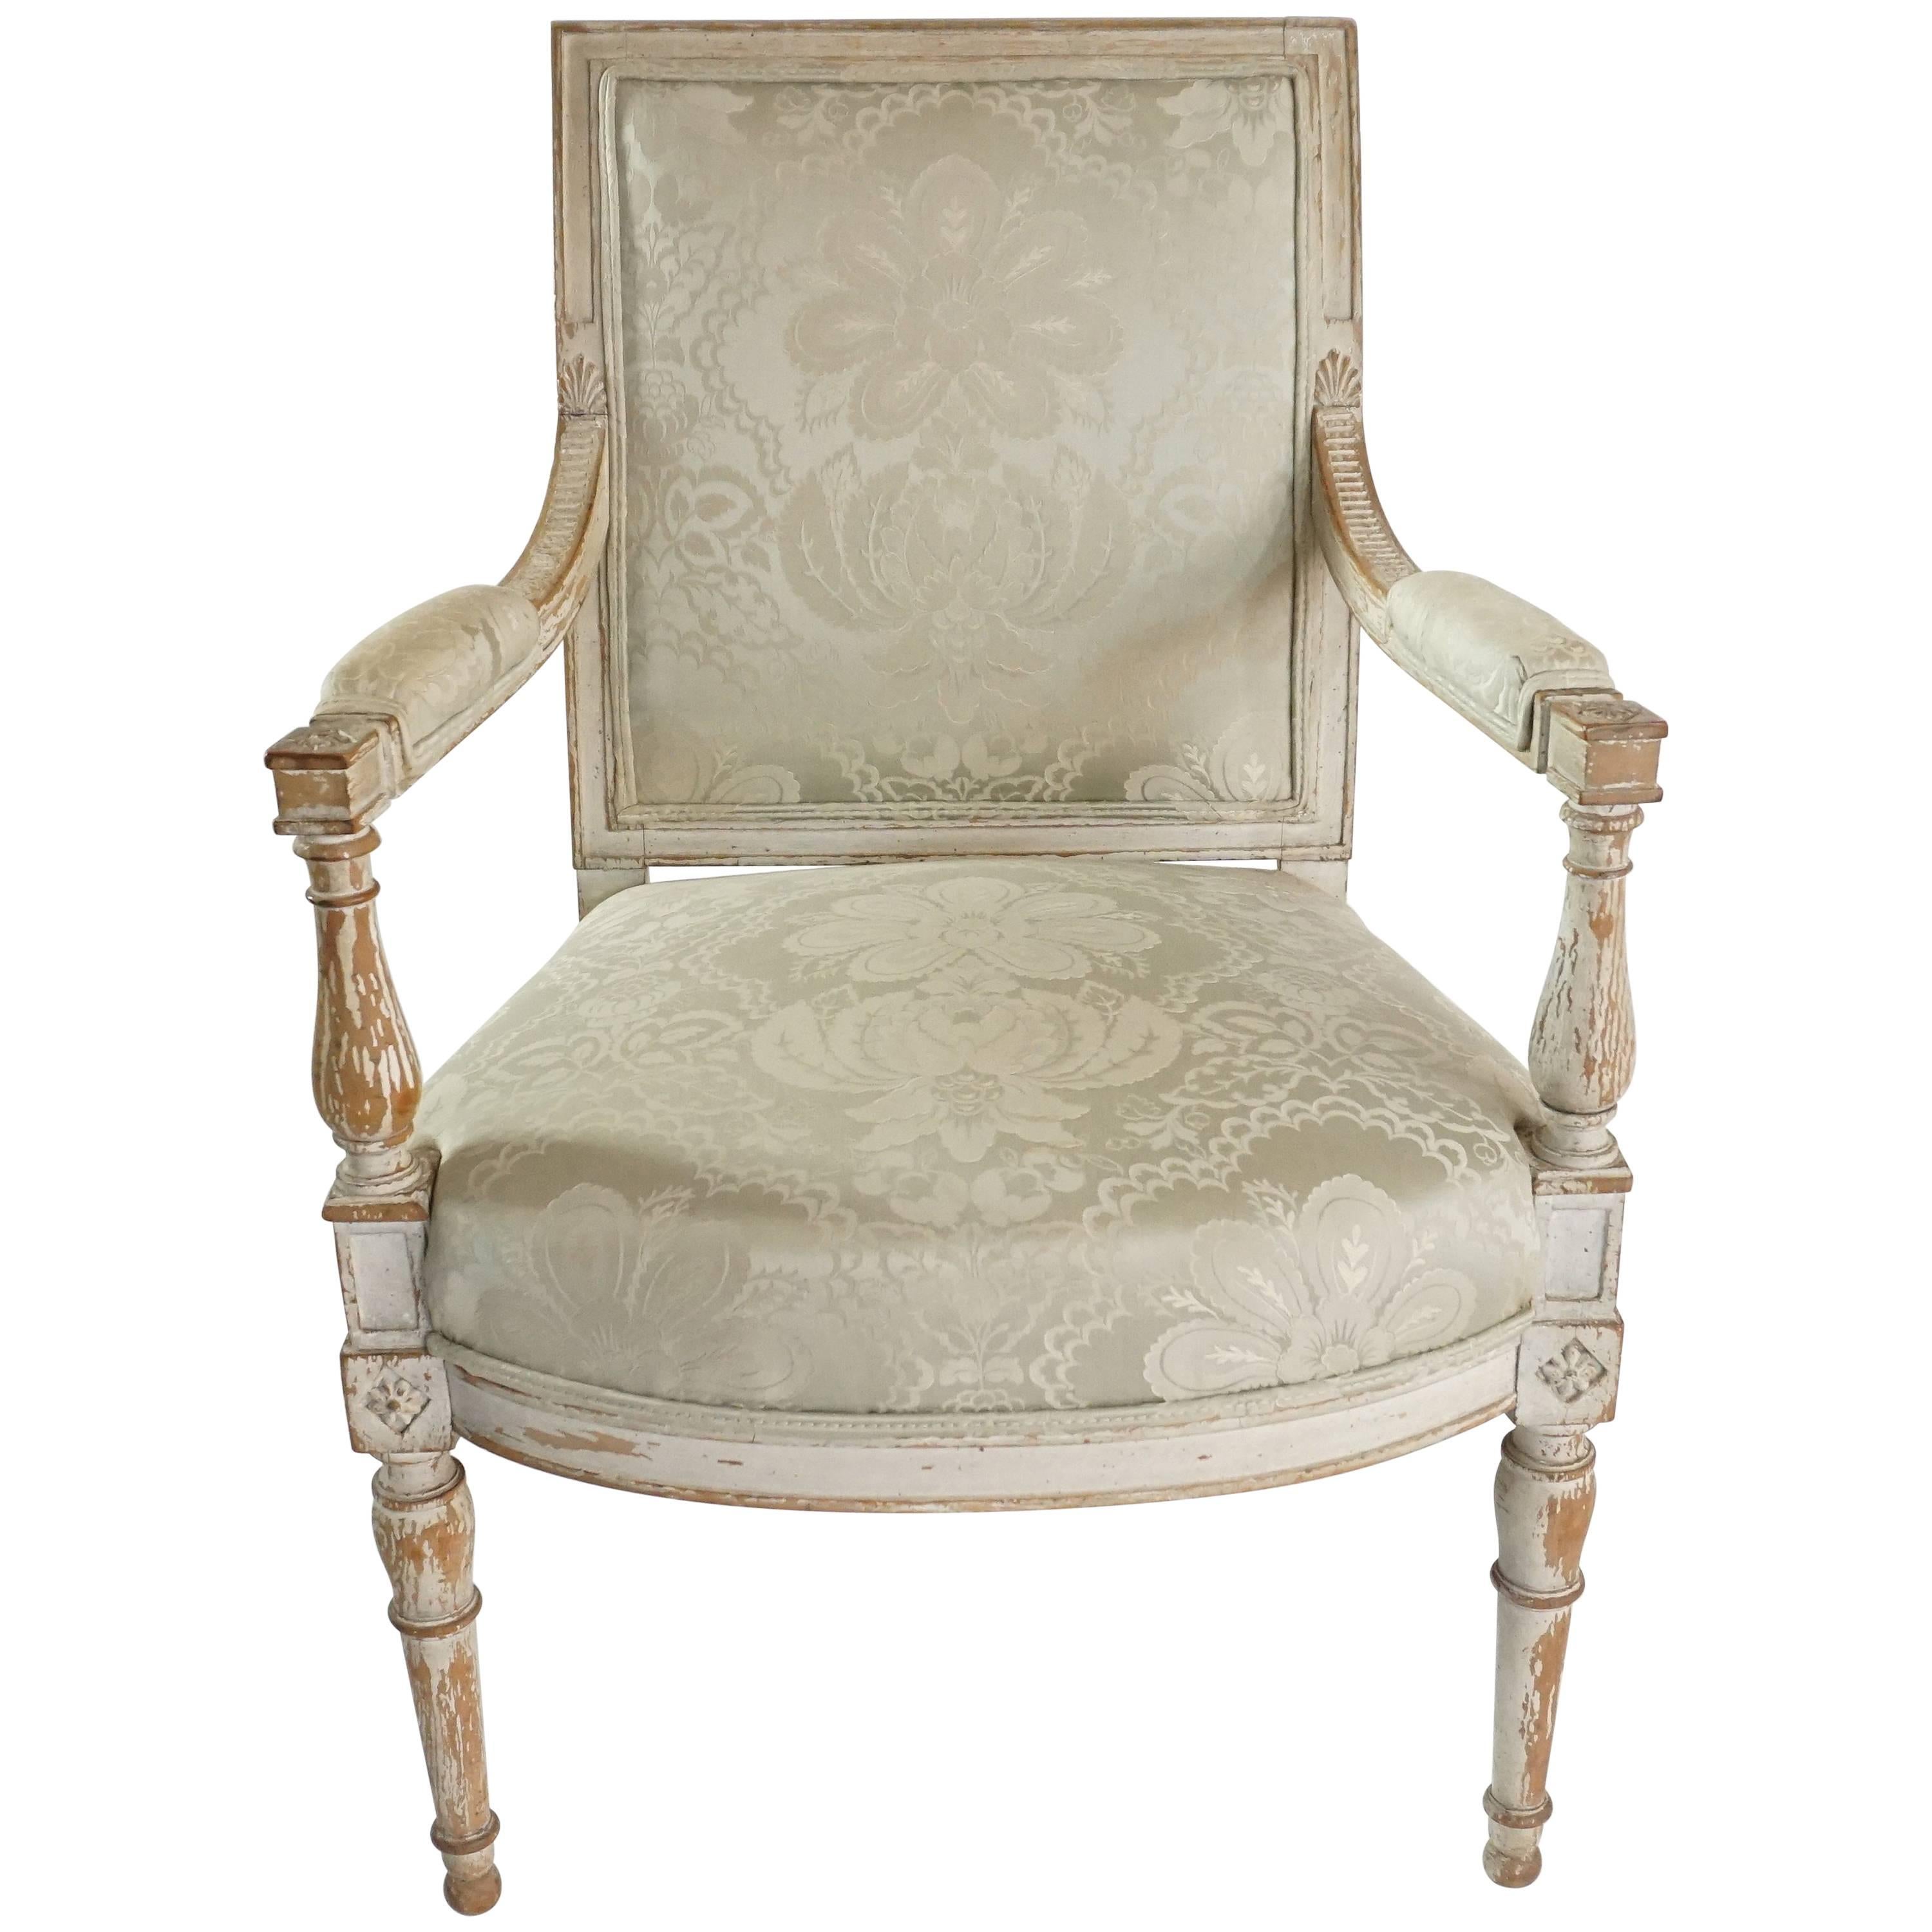 French Directoire Fauteuil or Armchair in Original Paint, circa 1795